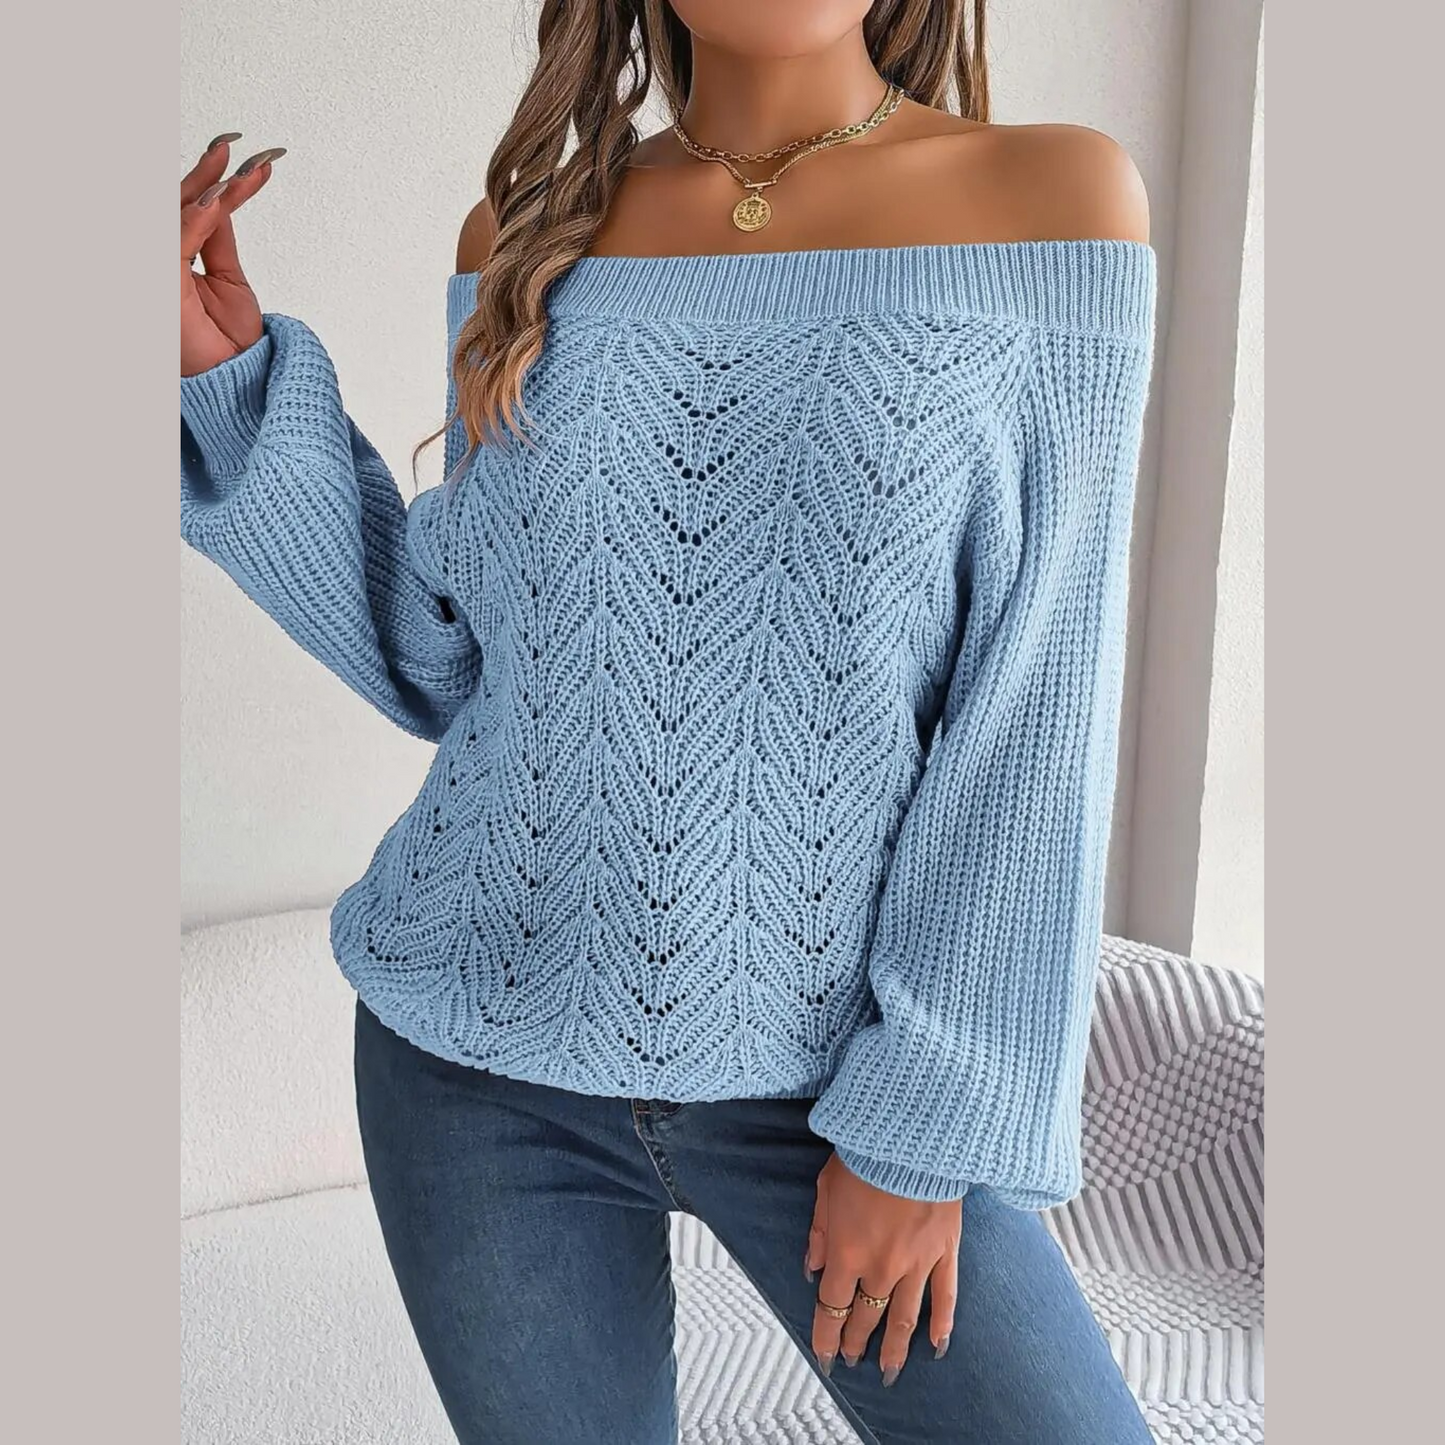 Loni - Blue Knitted Off The Shoulder Sweater Top